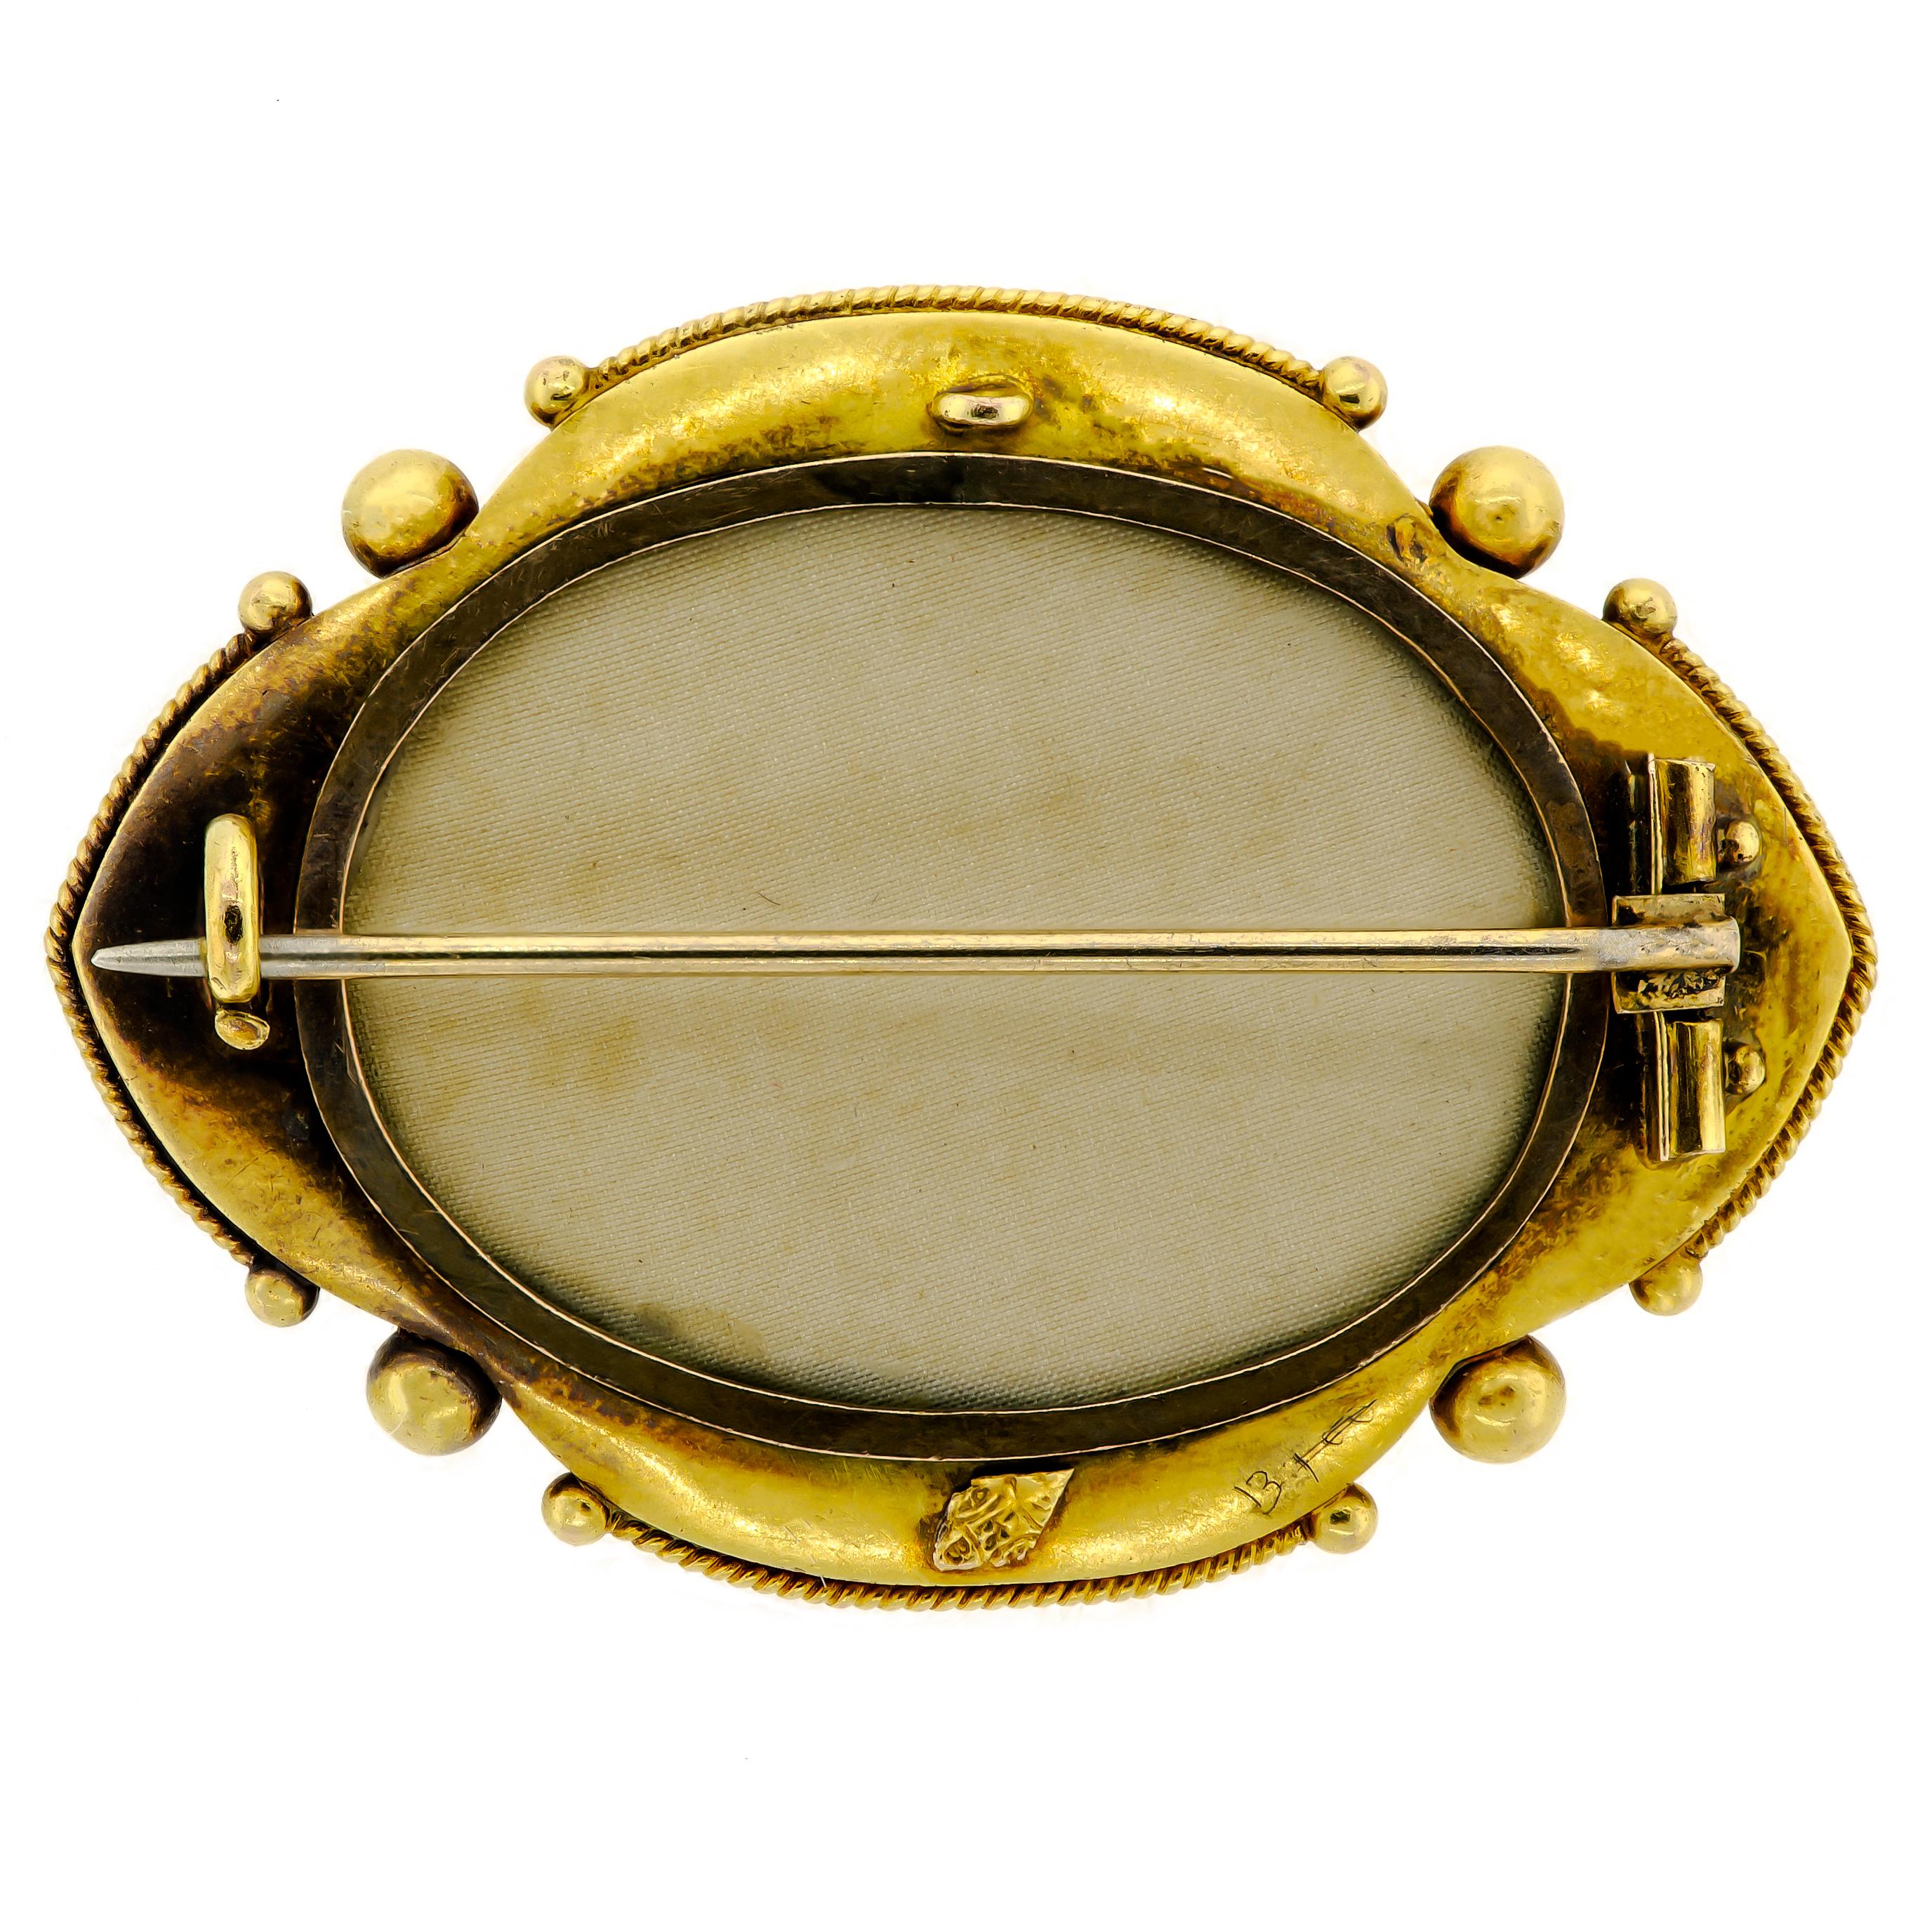 This stunning antique Victorian brooch is a true masterpiece of jewelry design. It is made of 14kt yellow gold, which gives it a warm, golden glow. The brooch features a locket compartment on the back that is adorned with numerous pearls and a small